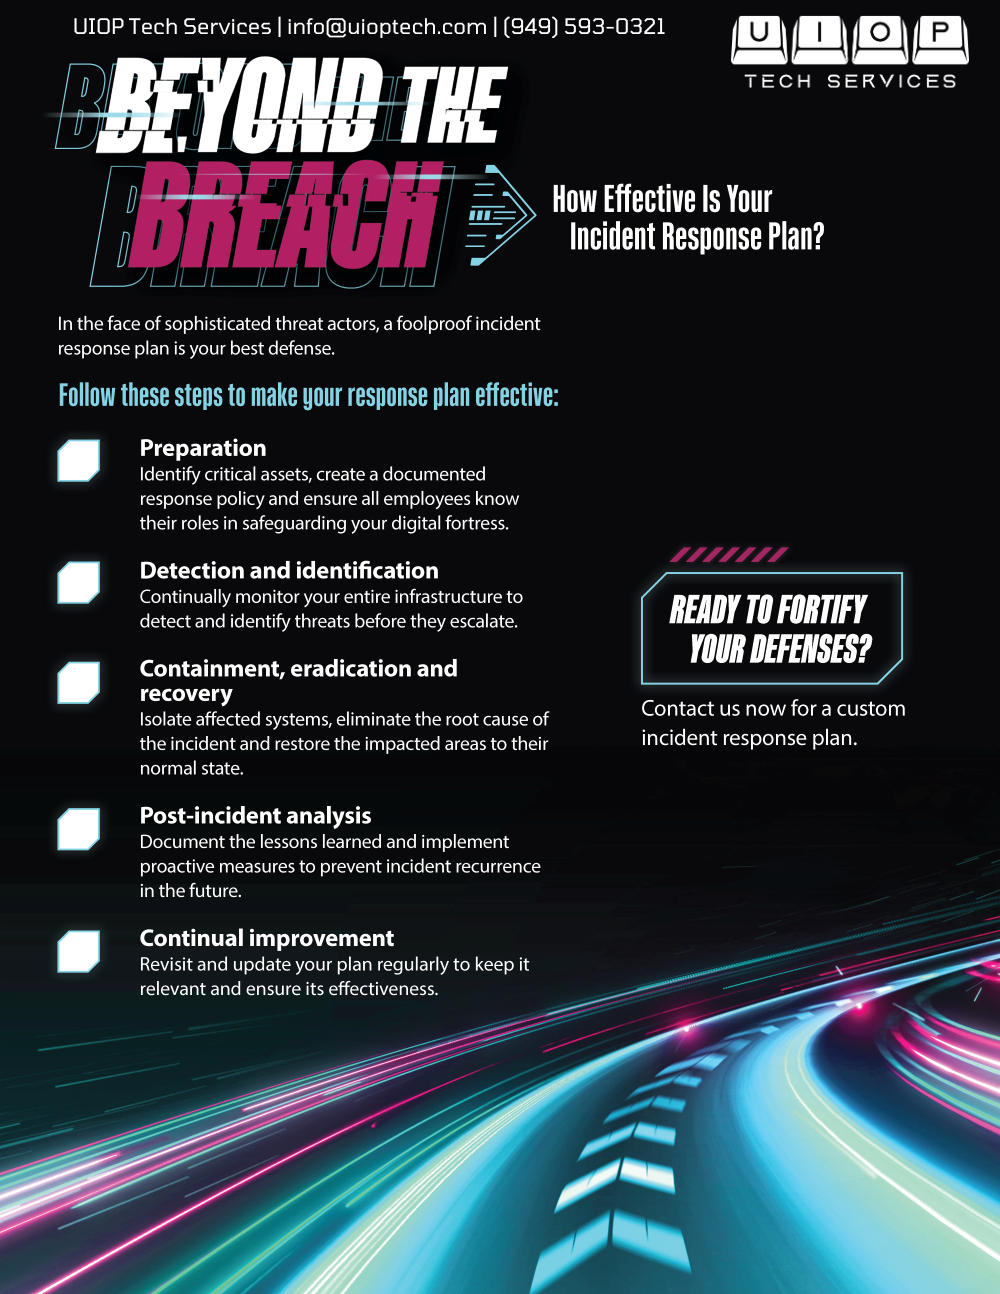 Assess Your Cybersecurity Preparedness and Learn How to Improve It